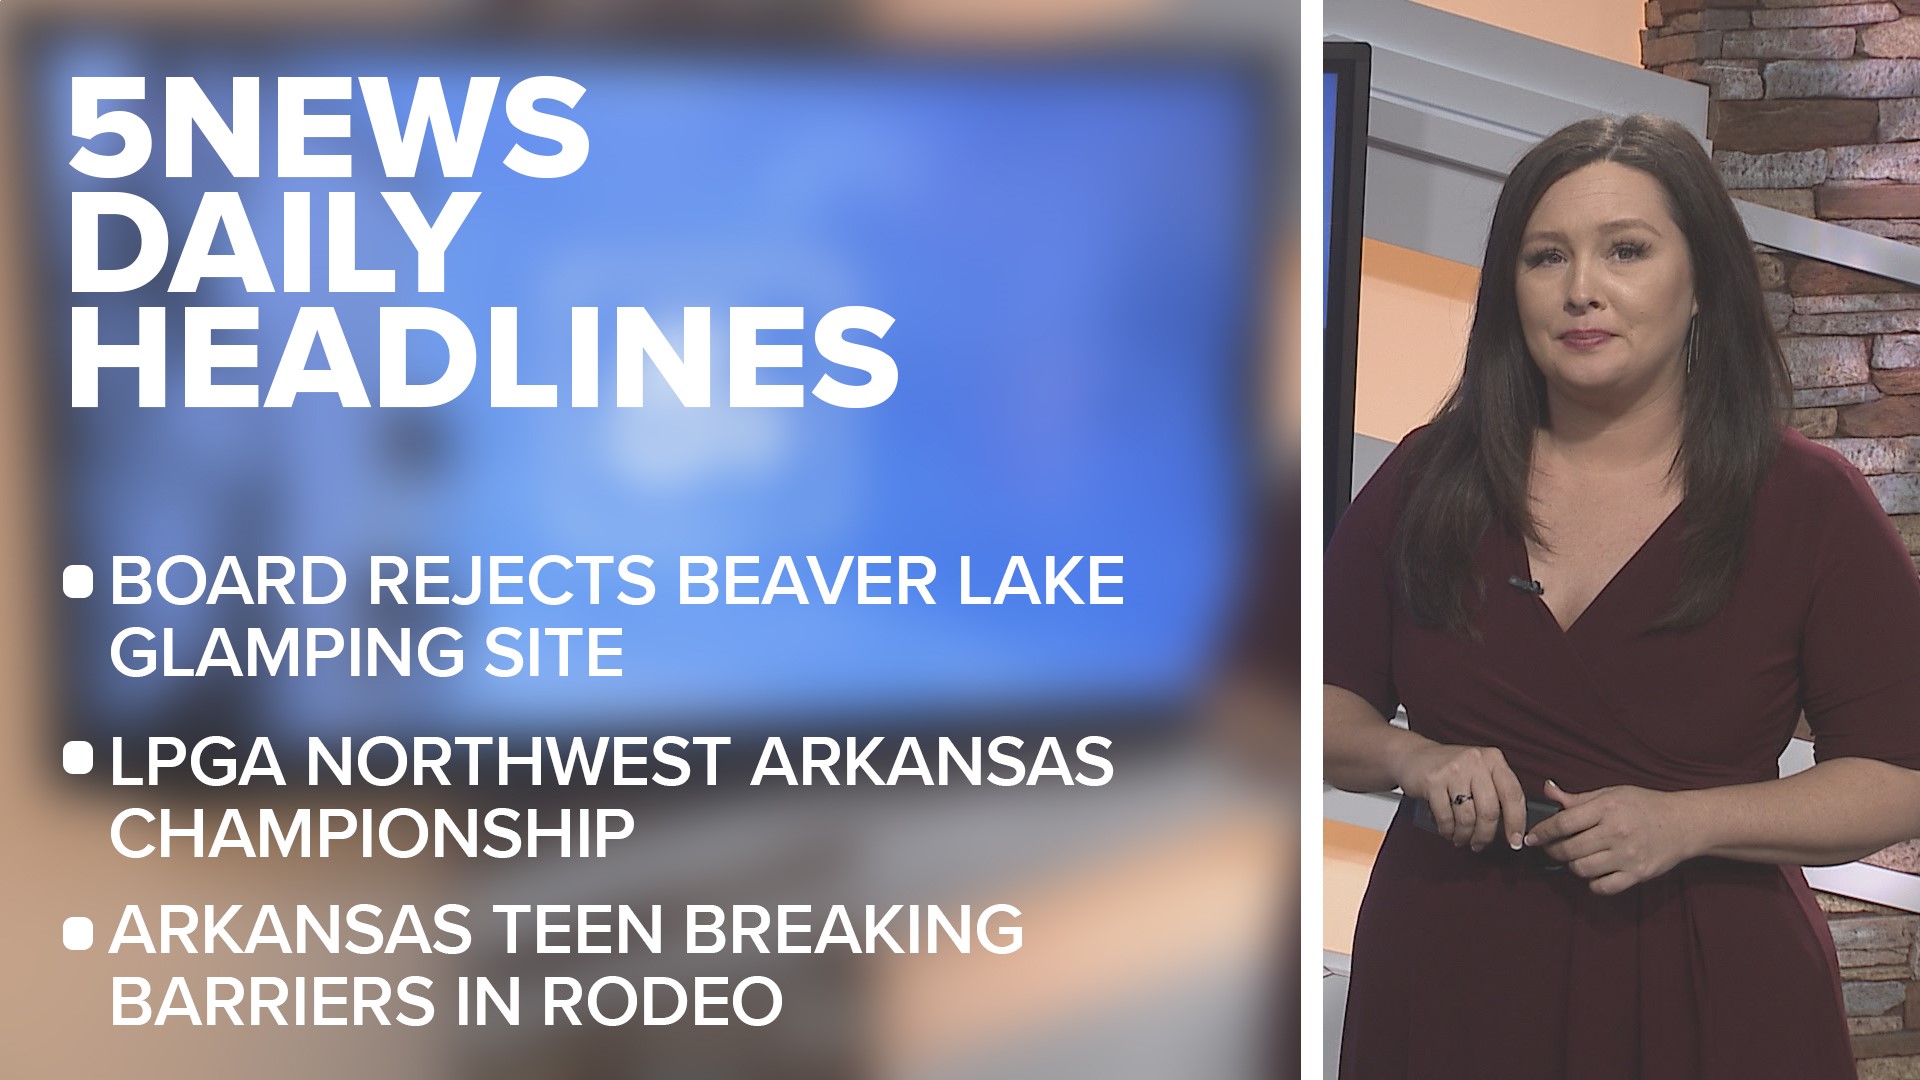 Daily headlines for local news across Northwest Arkansas and the River Valley for Sept. 23, 2022.